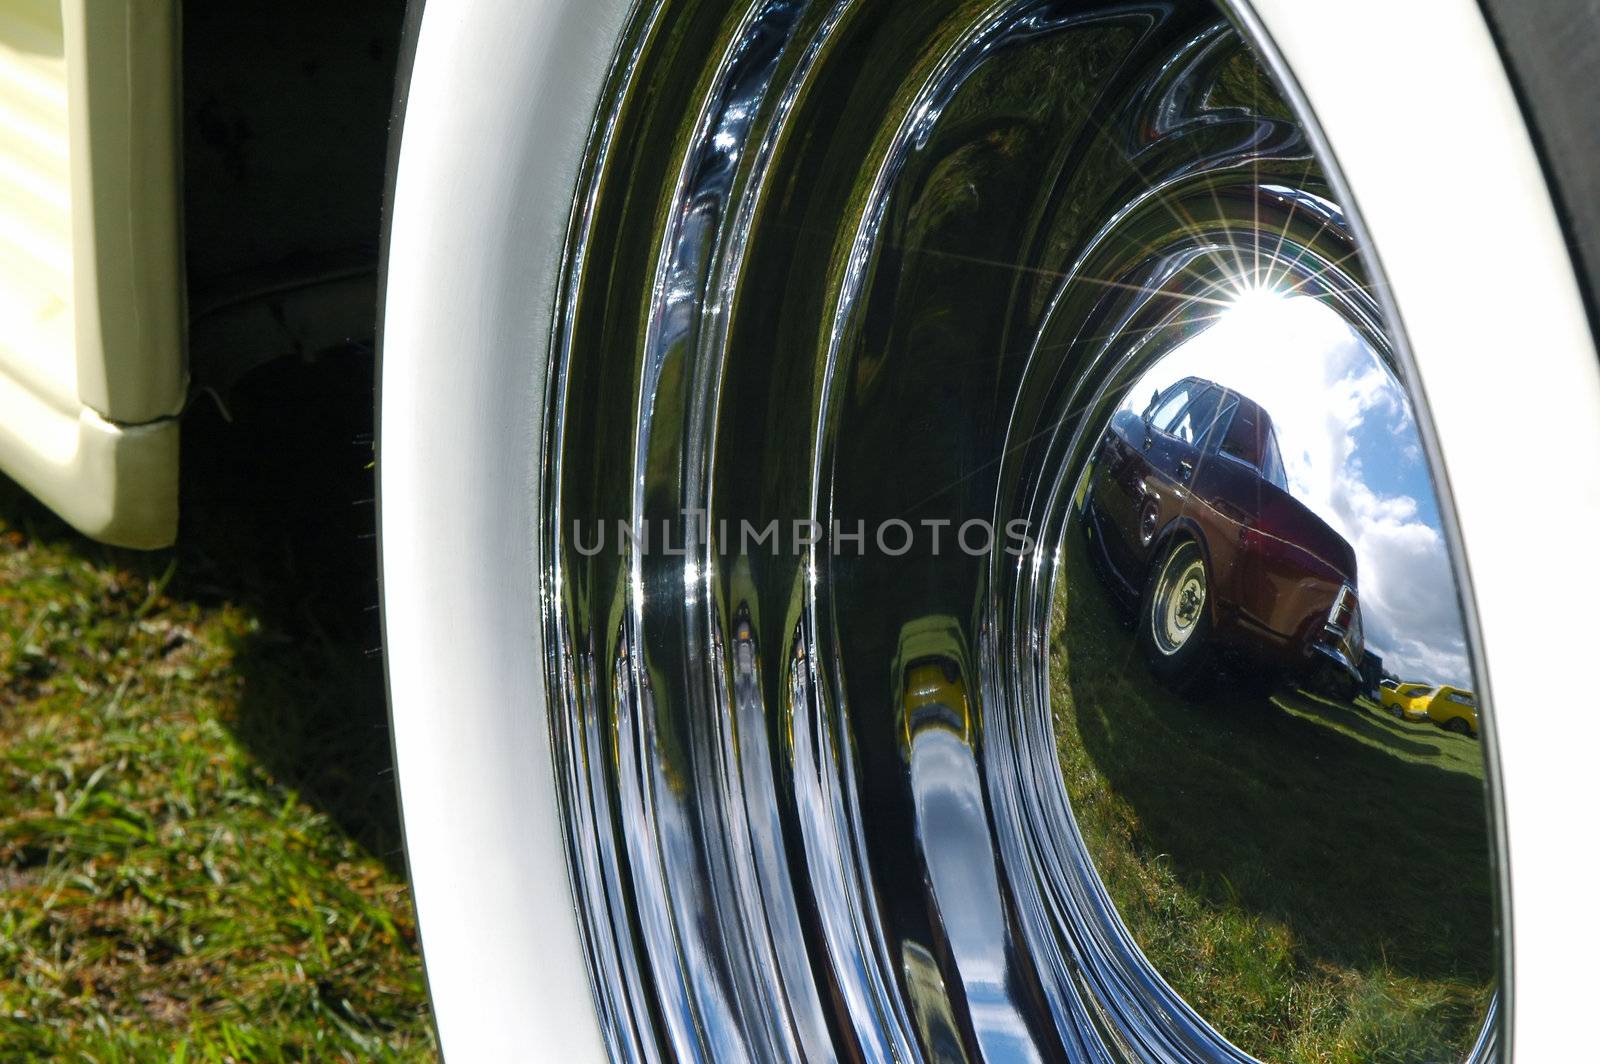 colorful reflections off the wheel hub of a vintage car